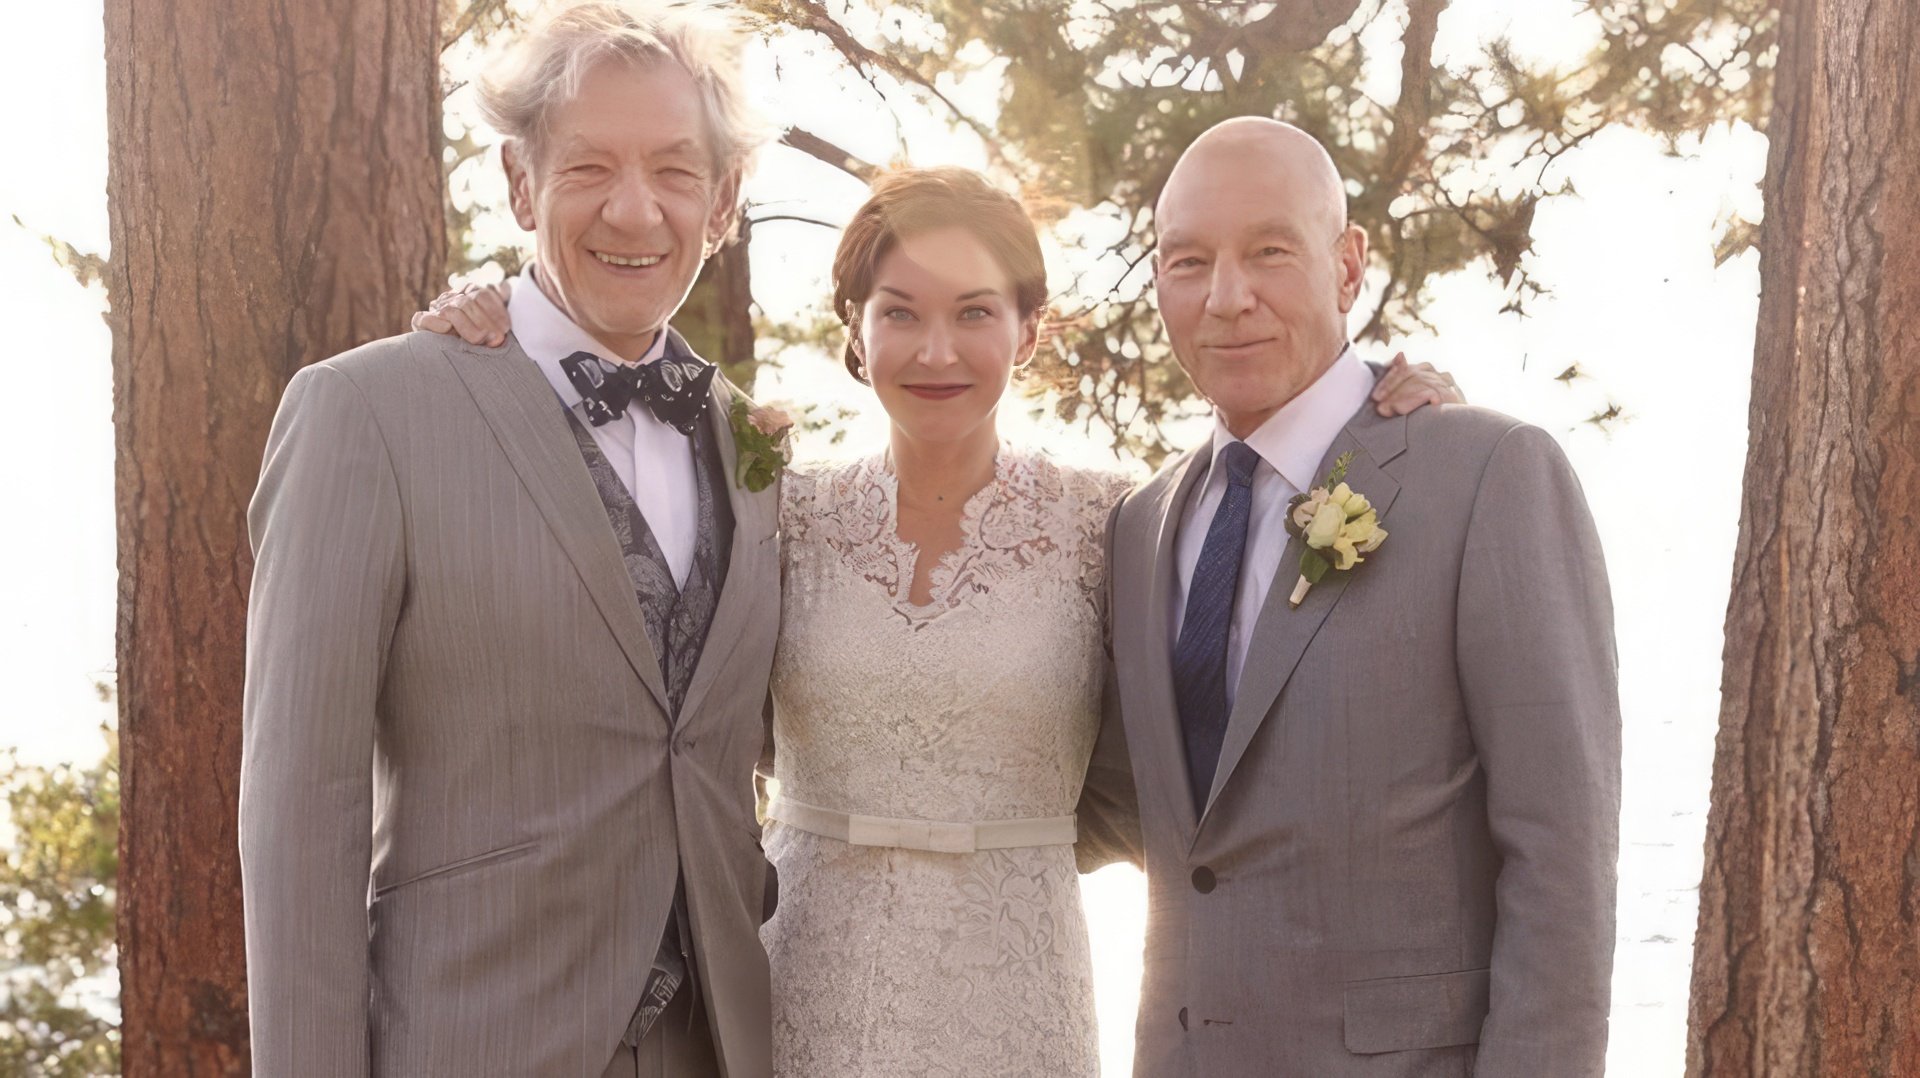 The wedding of Patrick Stewart and Sunny Ozell